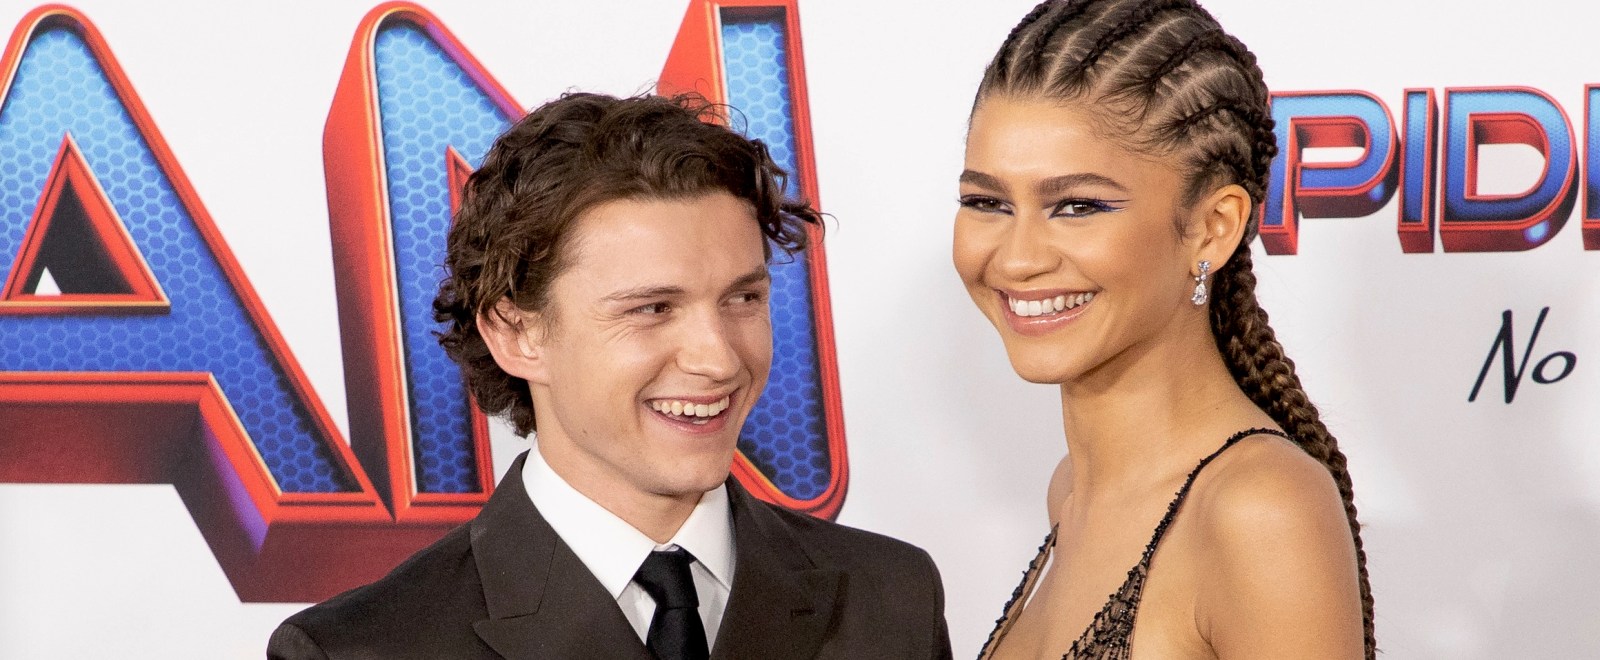 Zendaya Went On A ‘Night At The Museum’-Style Date With Boyfriend Tom Holland